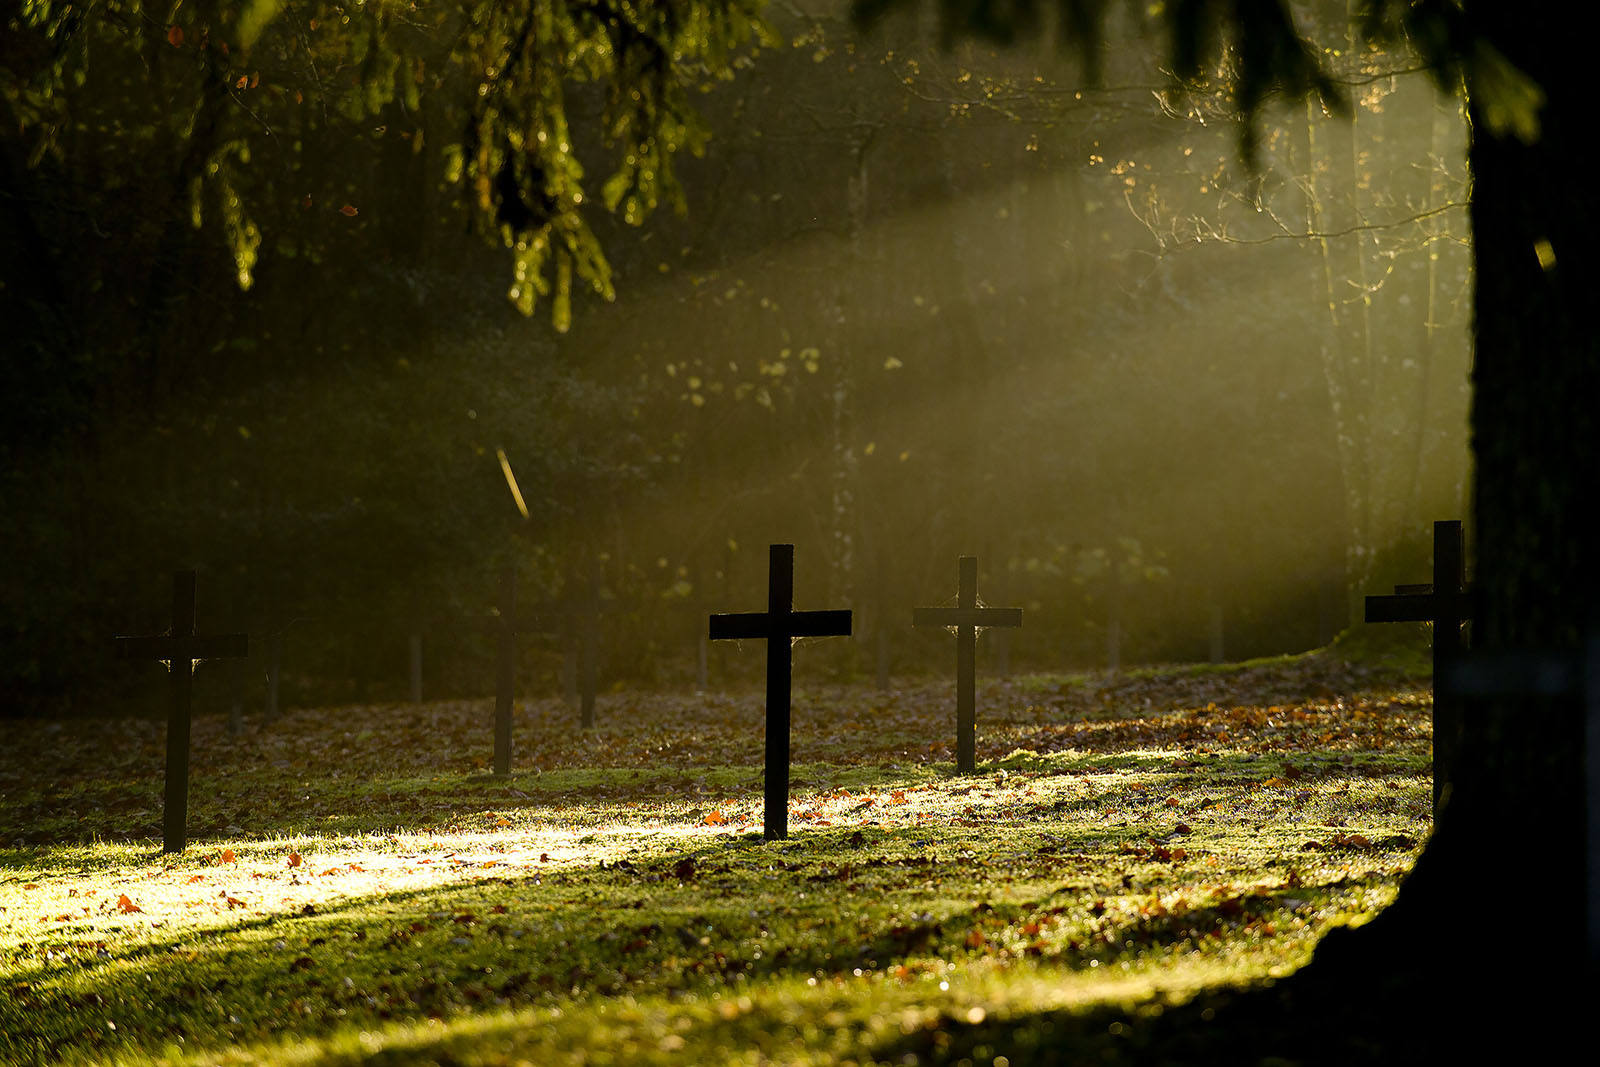 A grassy open area bounded by trees, lit by rays of sunlight. Tall grave markers shaped like crosses are planted in the clearing.